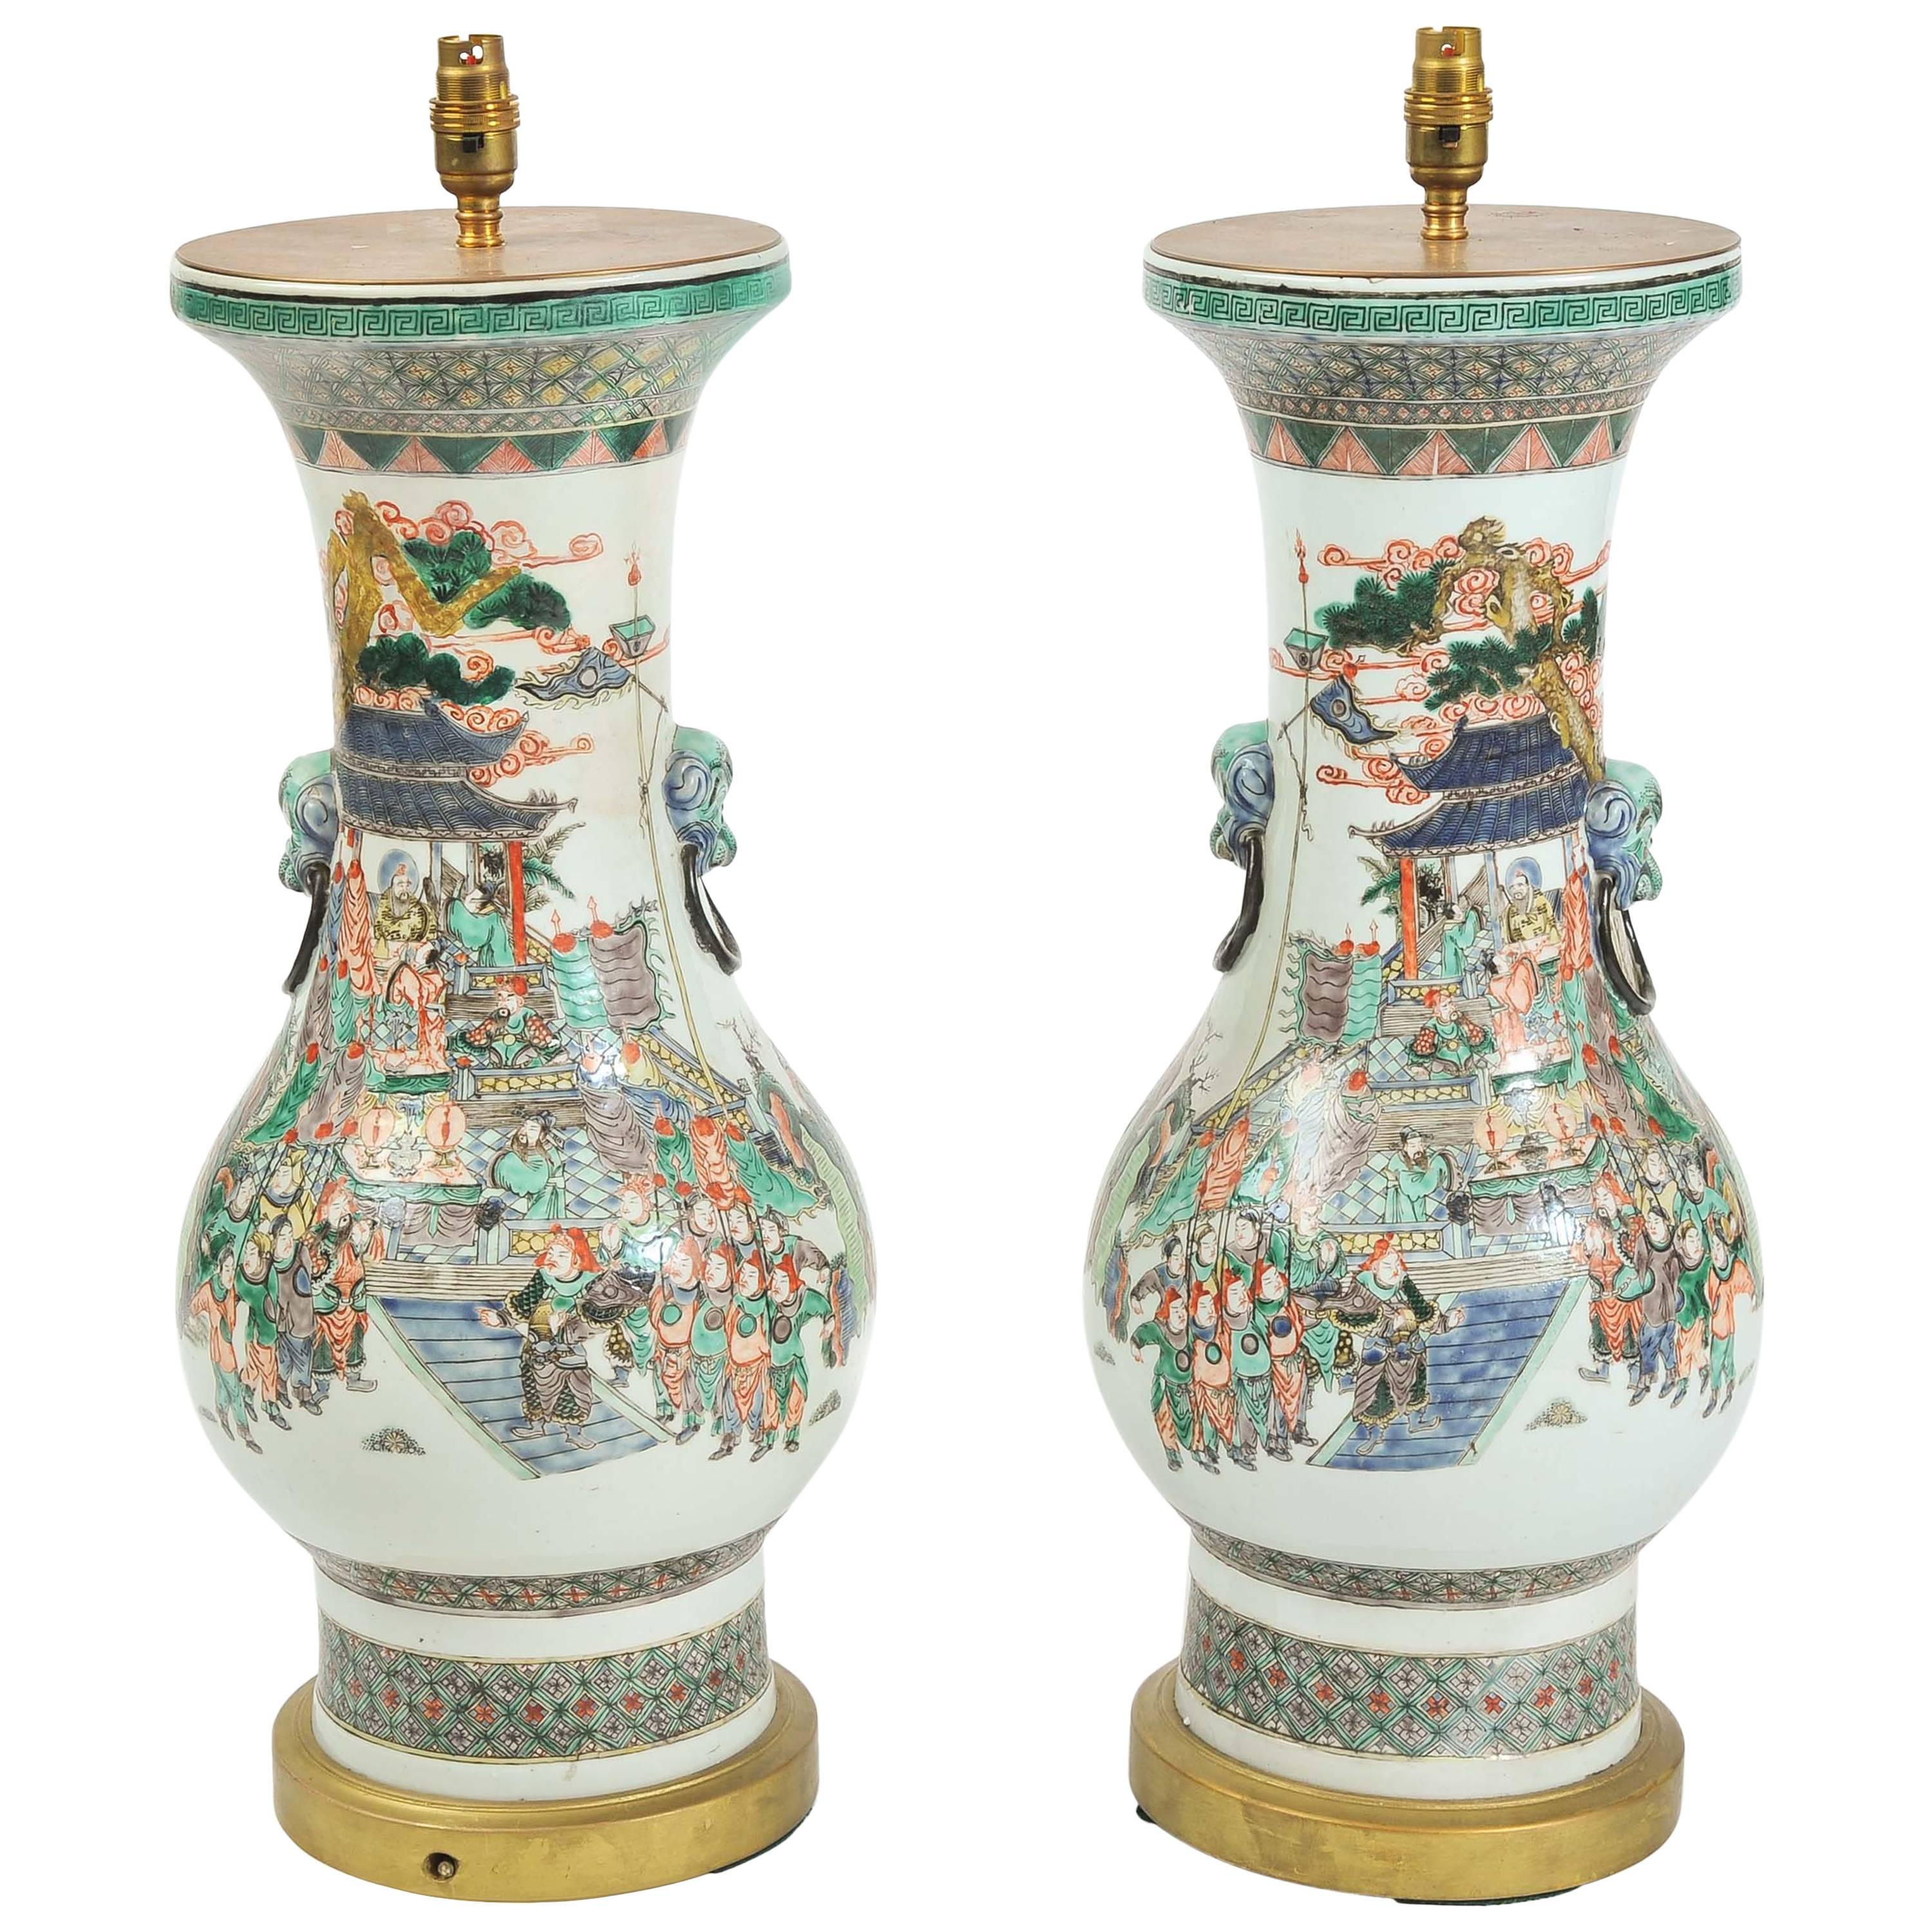 Pair of 19th Century Chinese Vases / Lamps